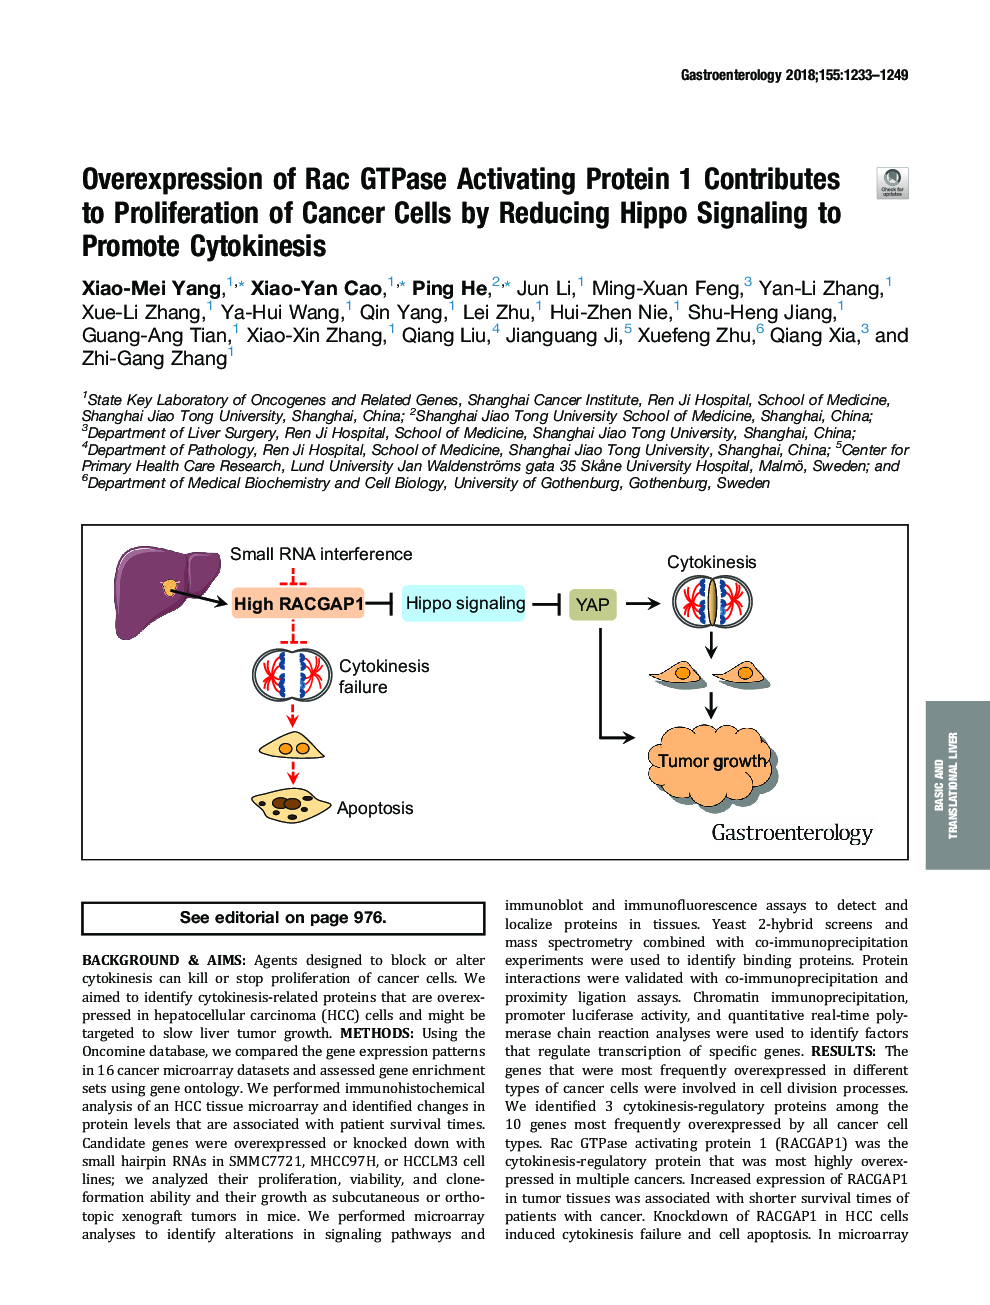 Overexpression of Rac GTPase Activating Protein 1 Contributes to Proliferation of Cancer Cells by Reducing Hippo Signaling to Promote Cytokinesis